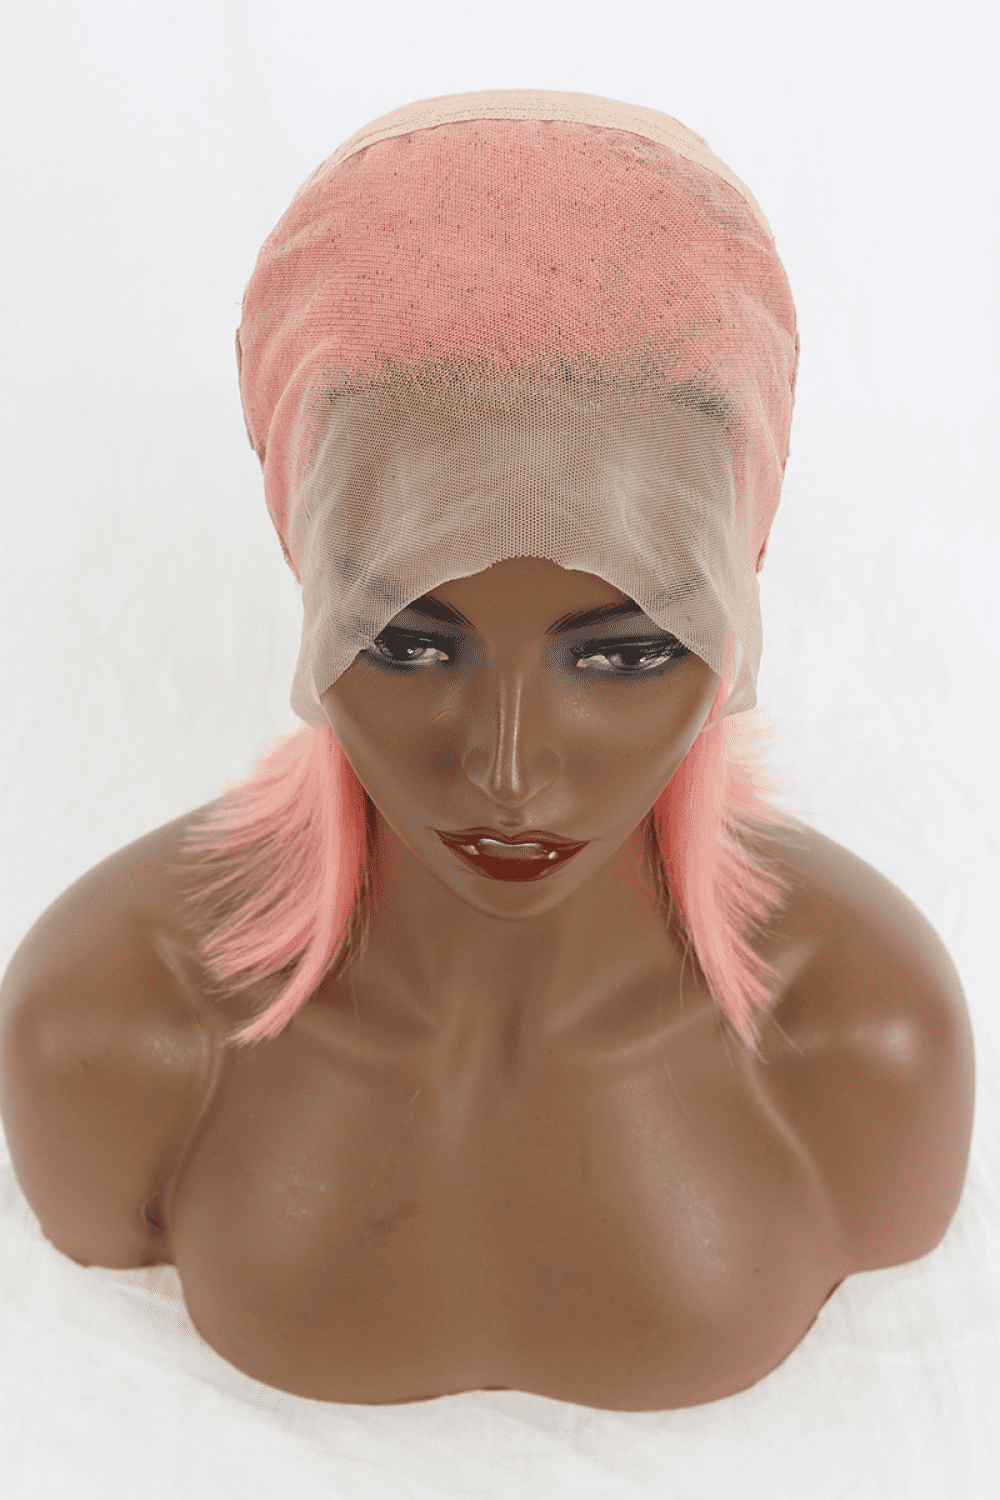 Sassy Pink Lace Front Bobo Human Hair Wigs for that daring look